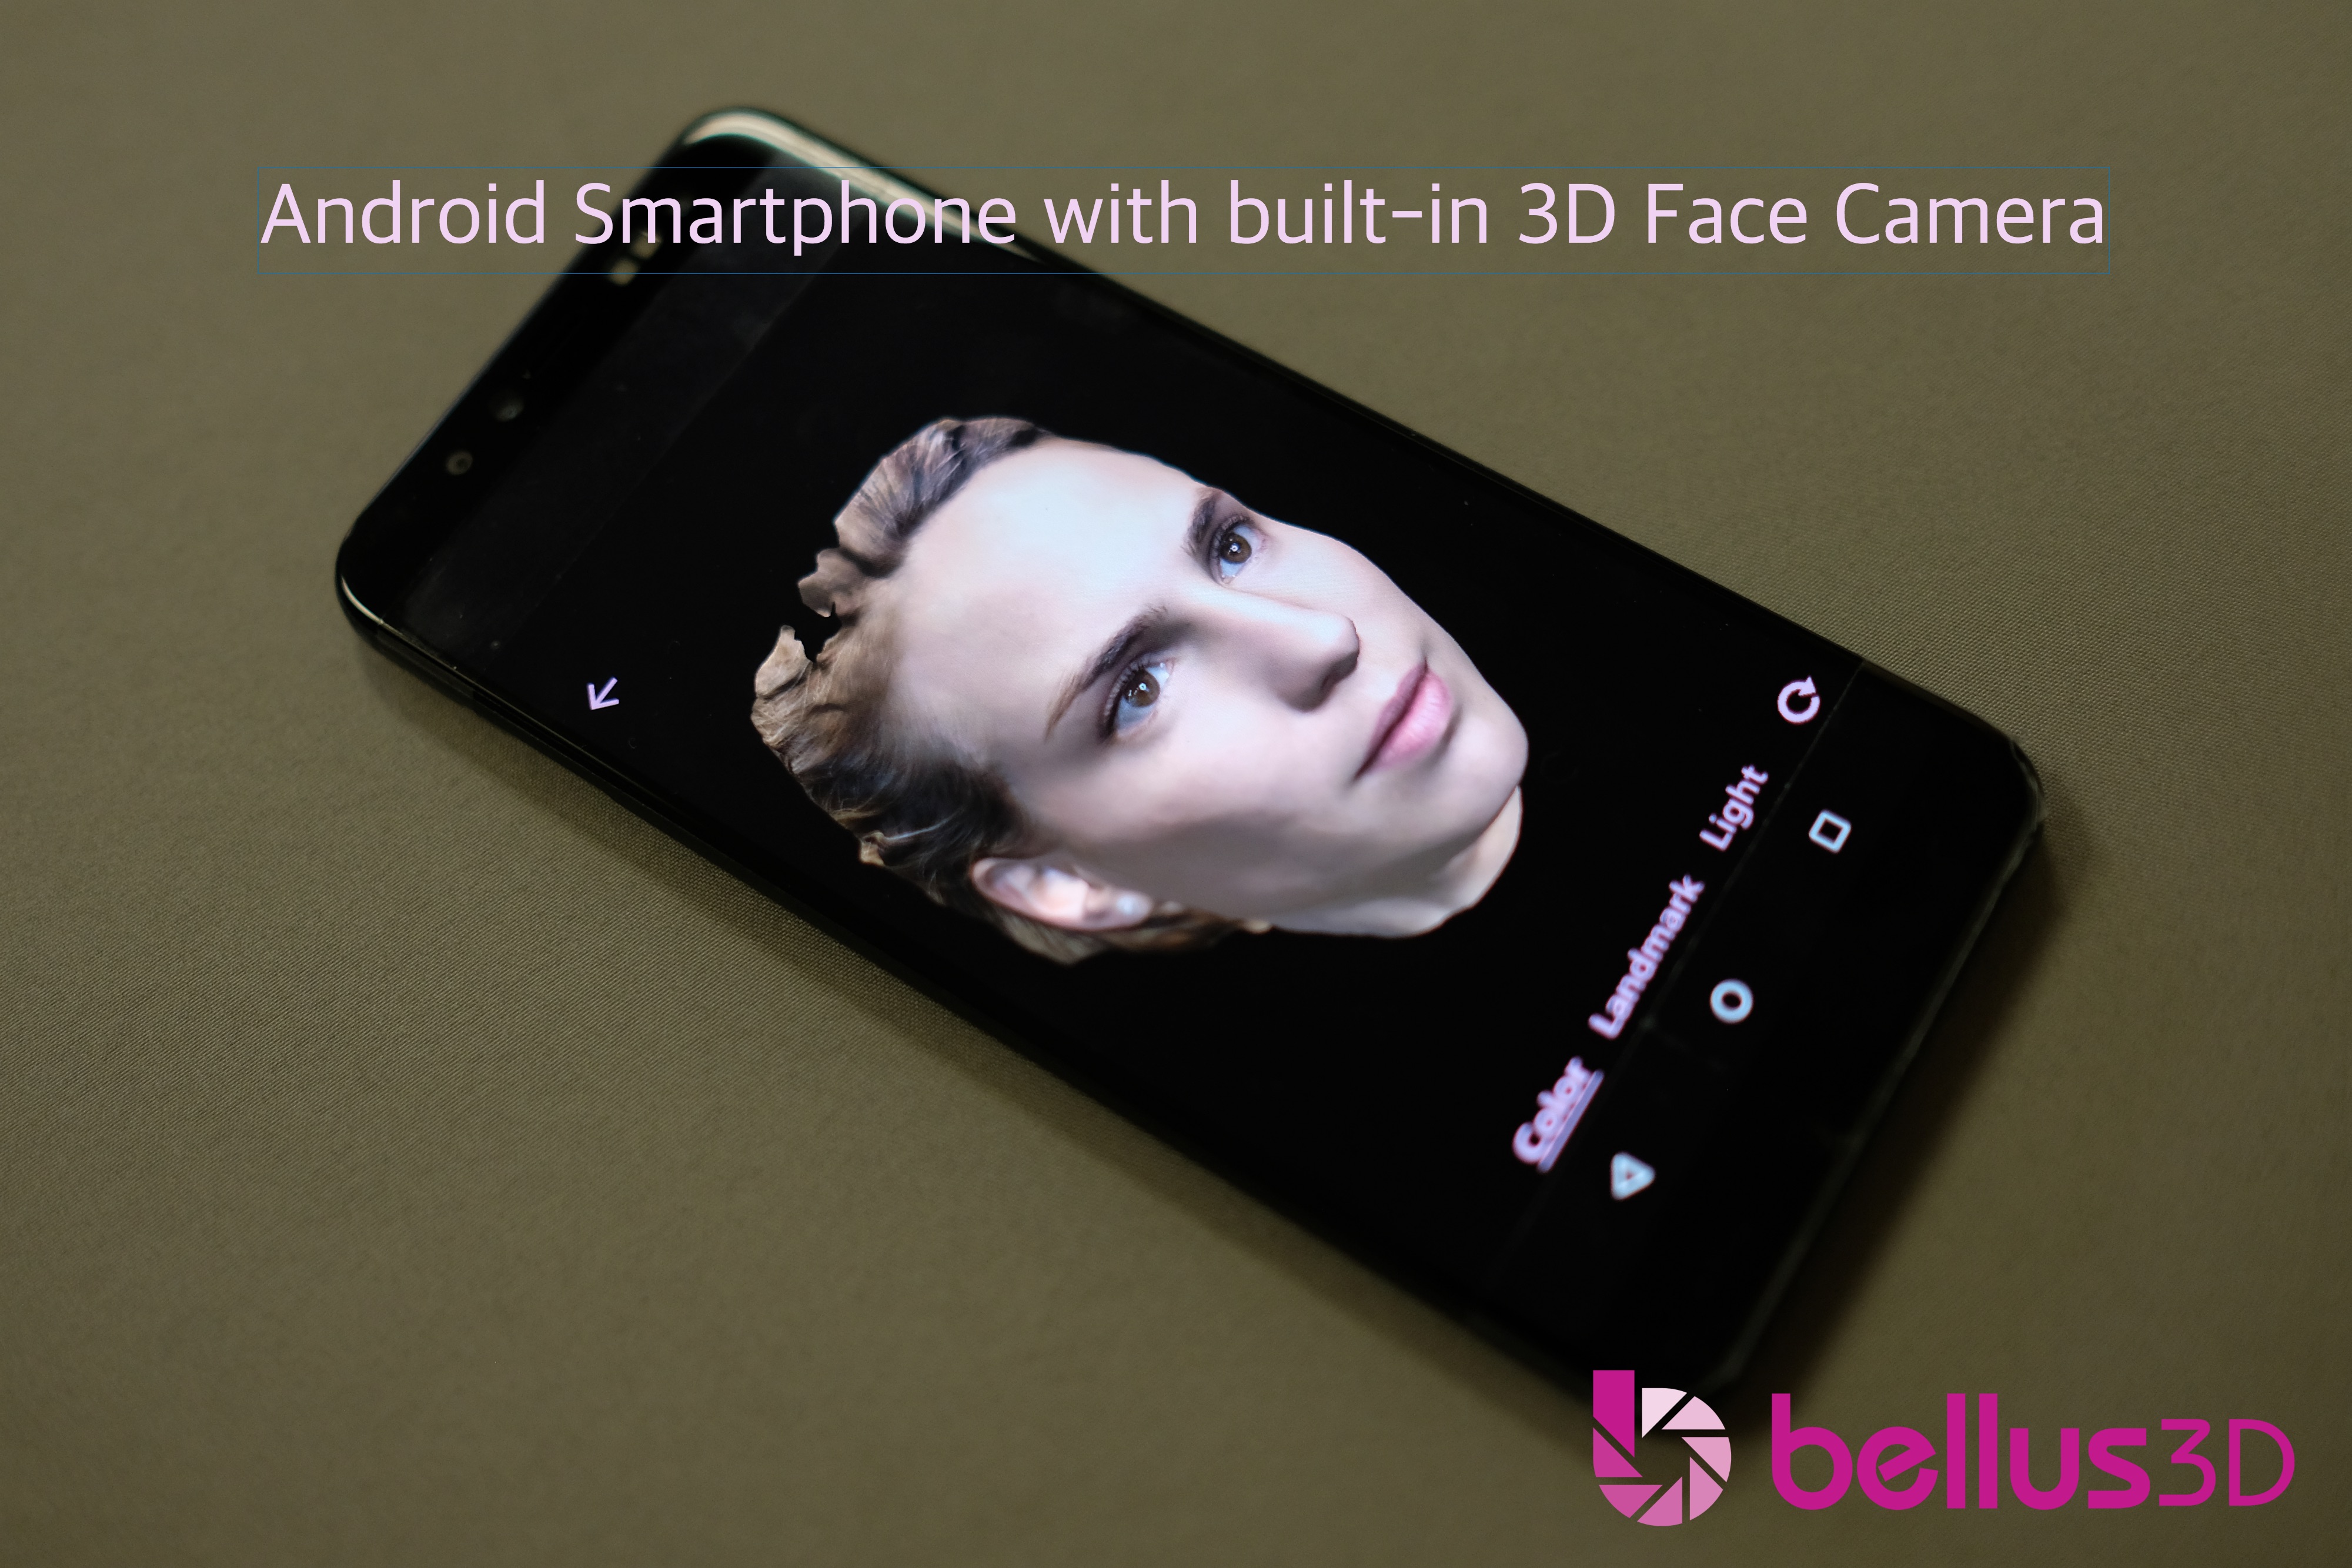 Smartphone with Bellus3D Face Camera built-in photo